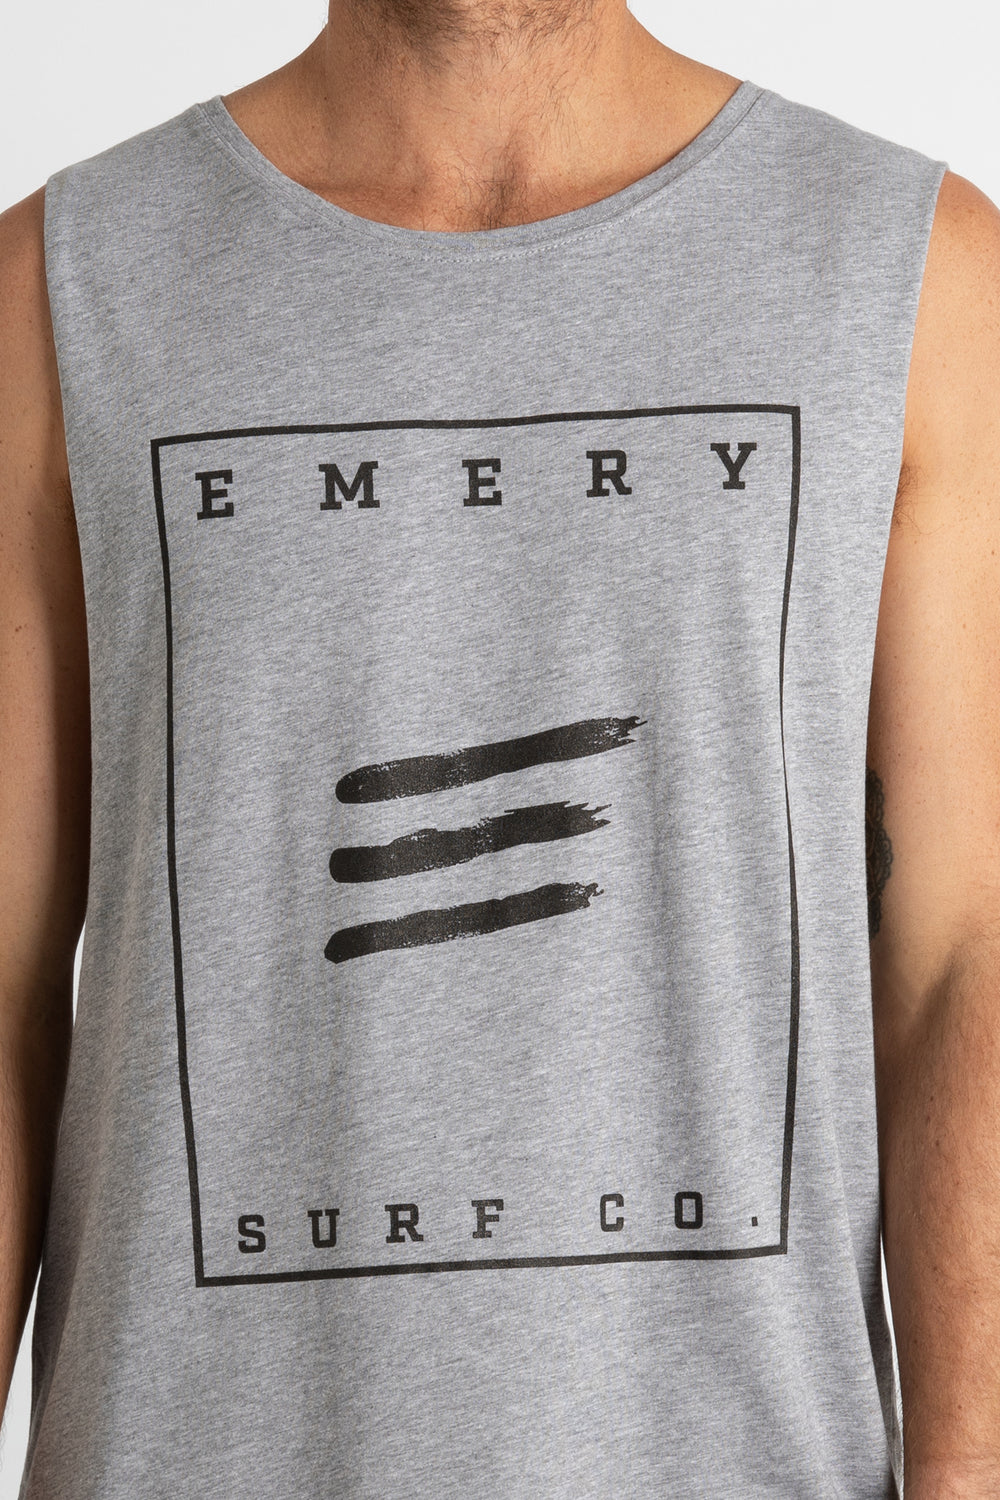 SURF CO BAND CUT TEE / GREY MARLE - BACK IN STOCK